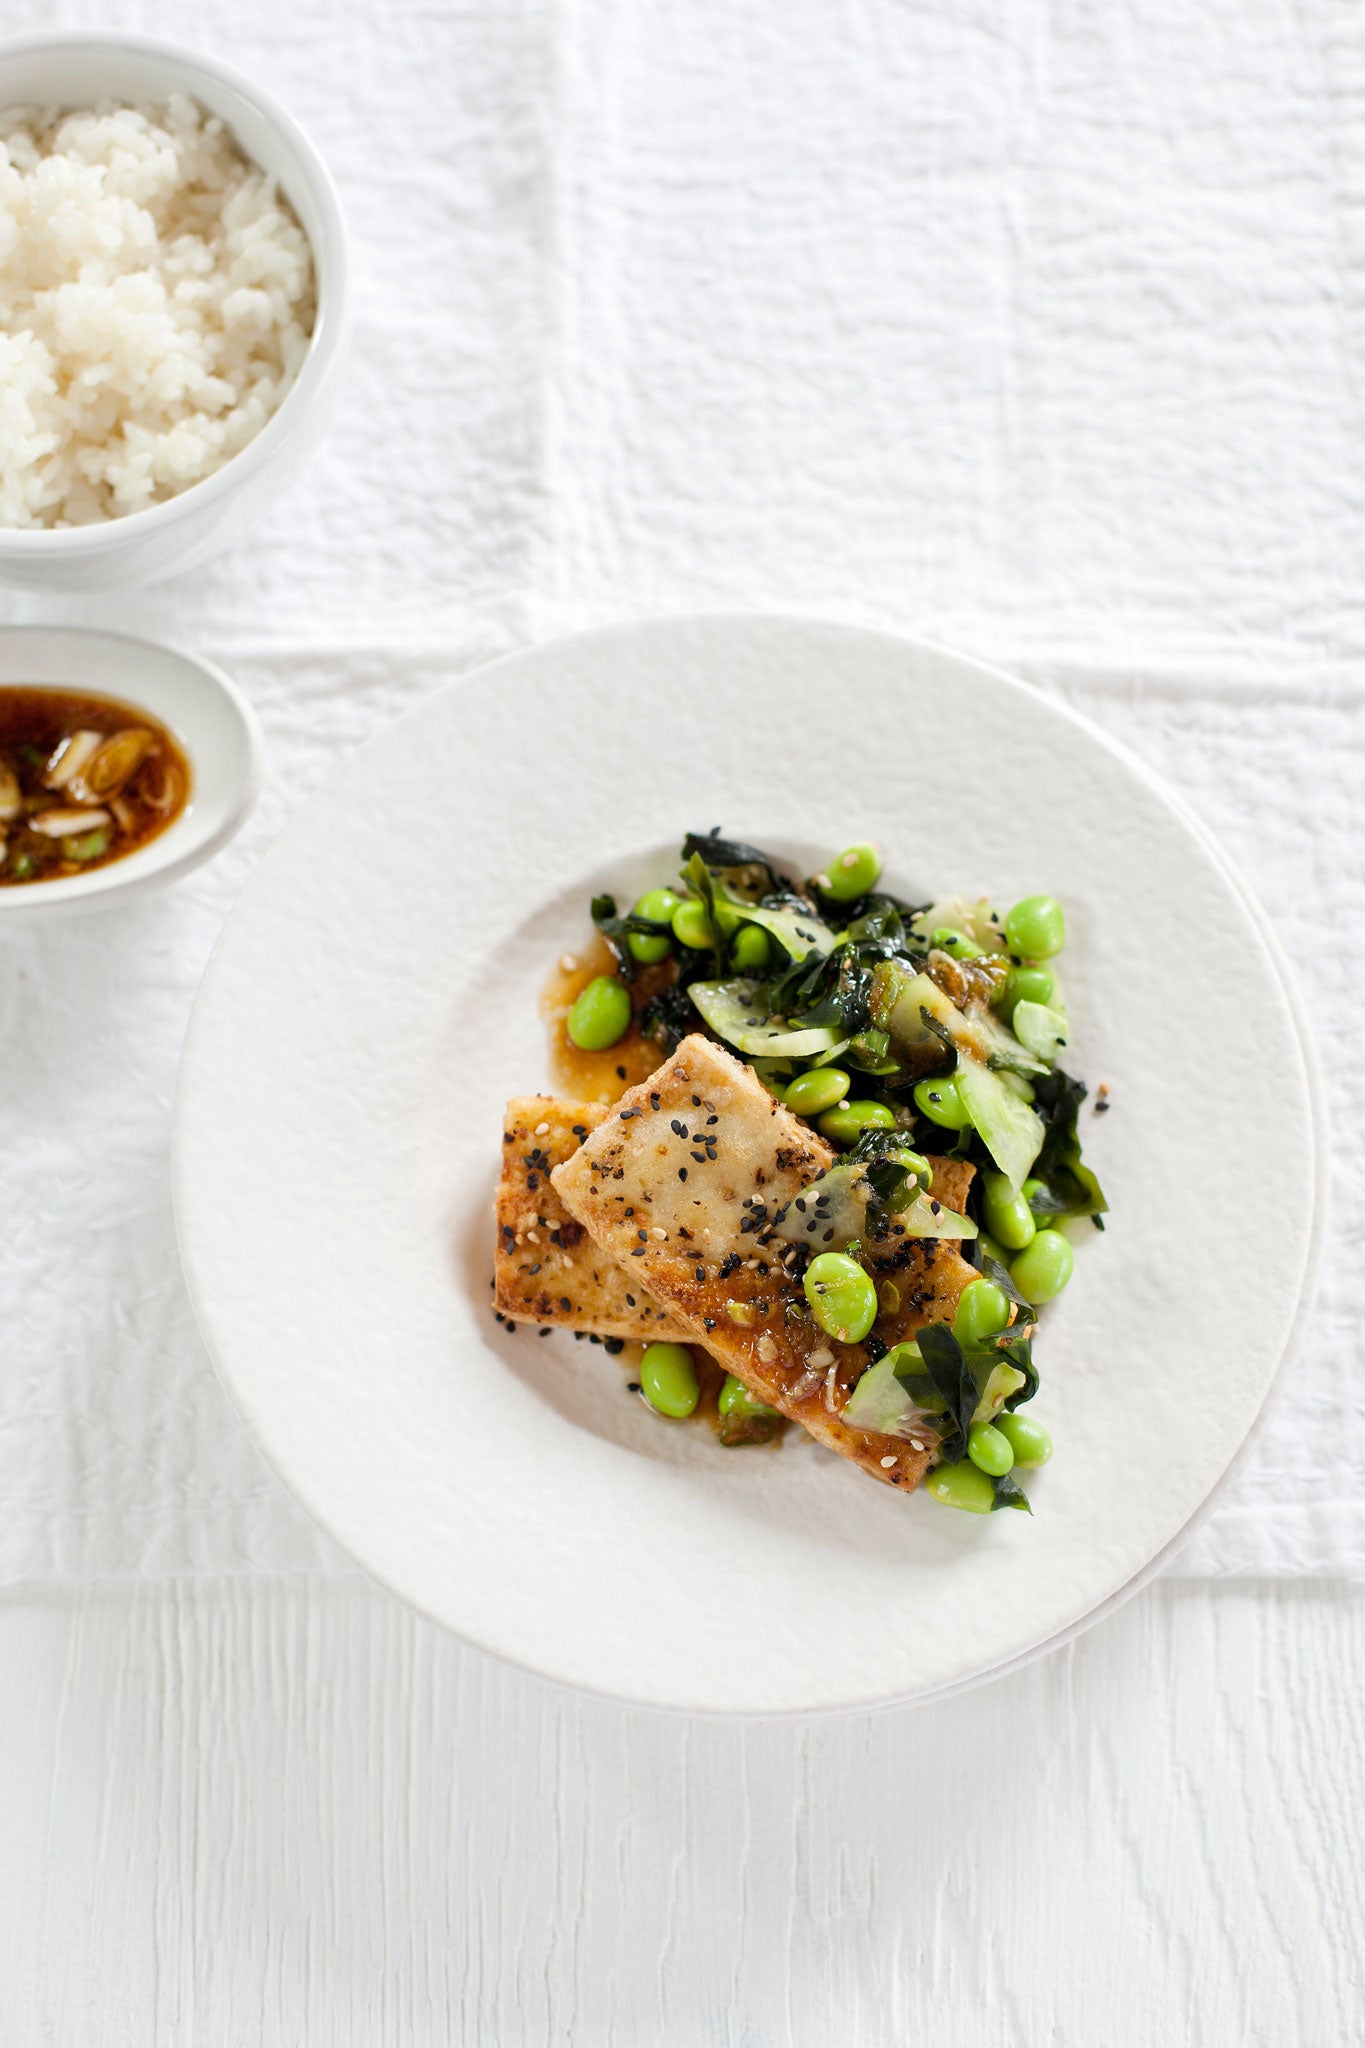 Grilled tofu steak with ginger and edamame